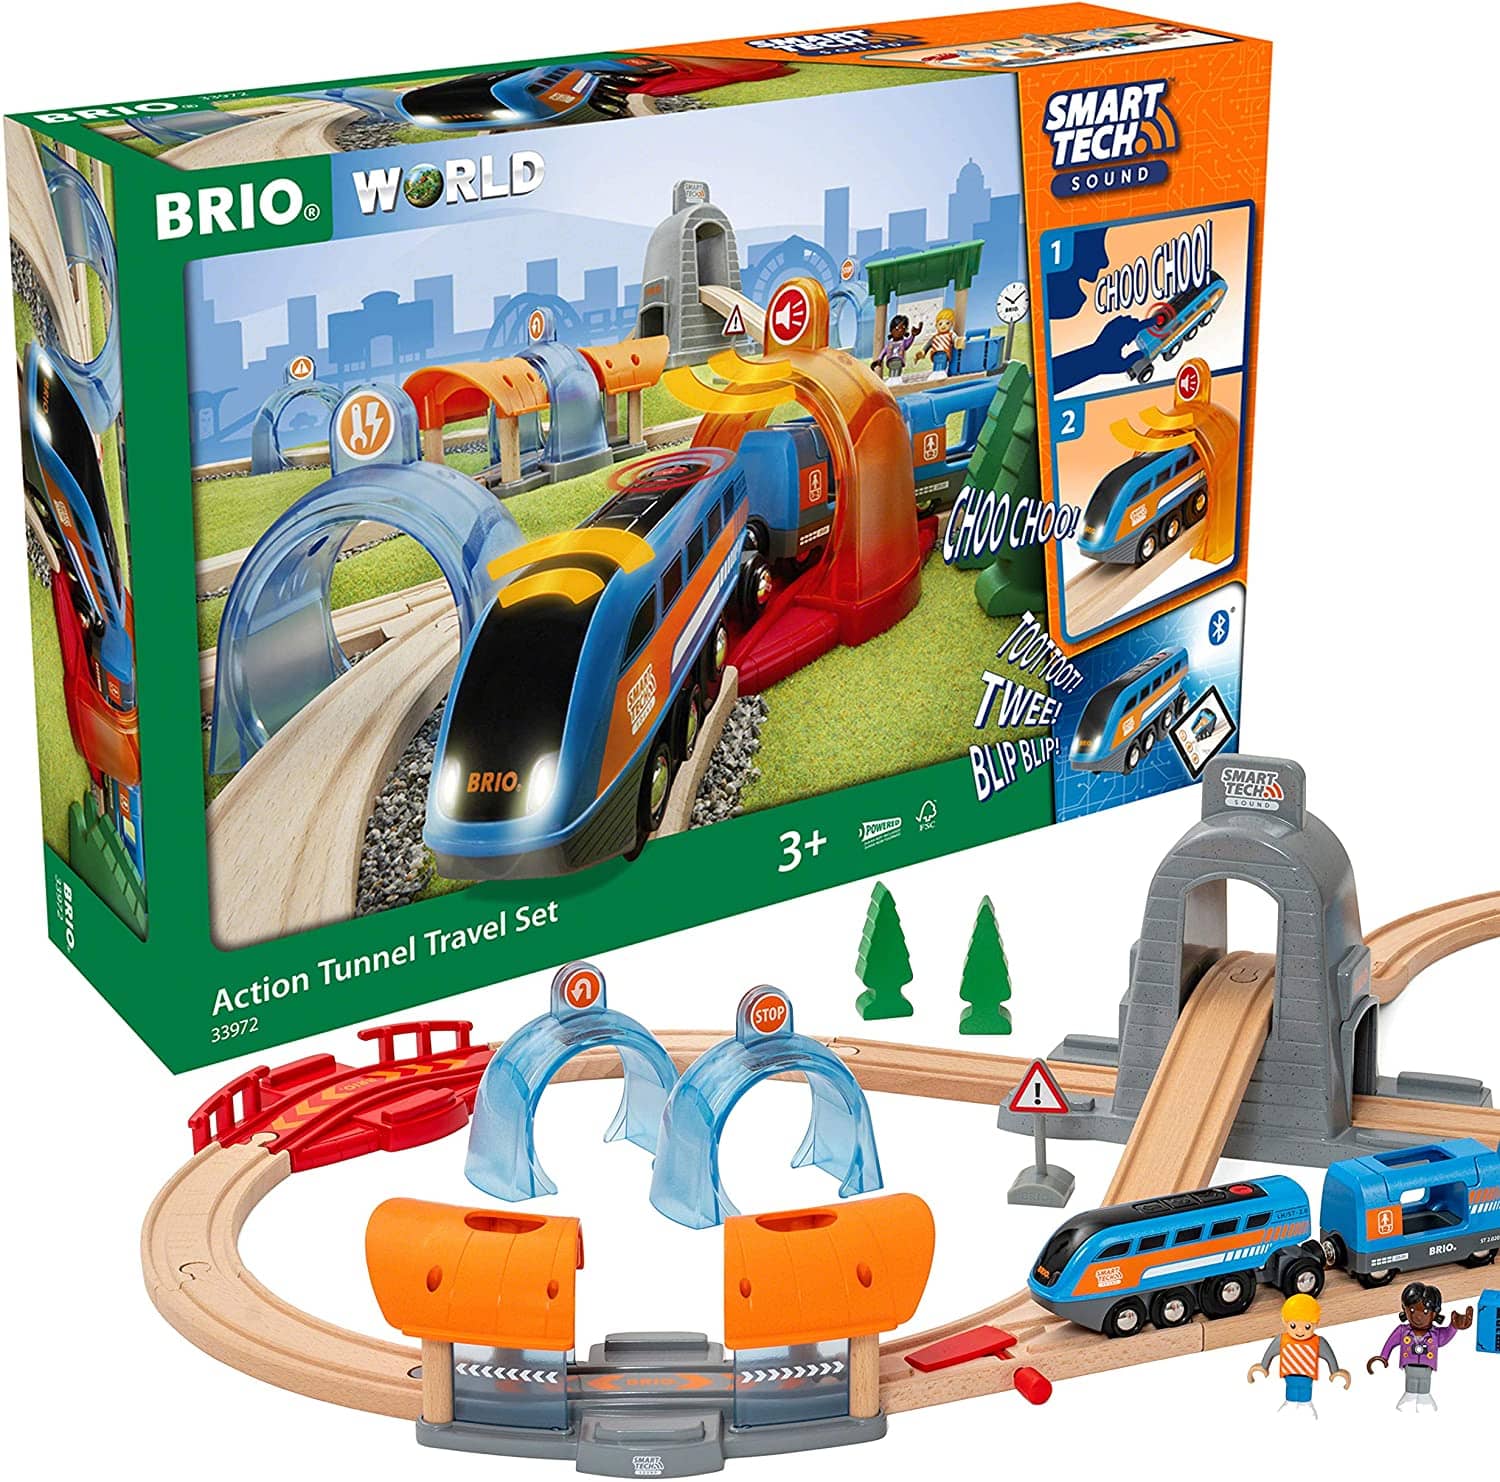 Brio World - 33972 Smart Tech Tunnel Travel Set | Toy Train Accessory For Kids Age 3 And Up